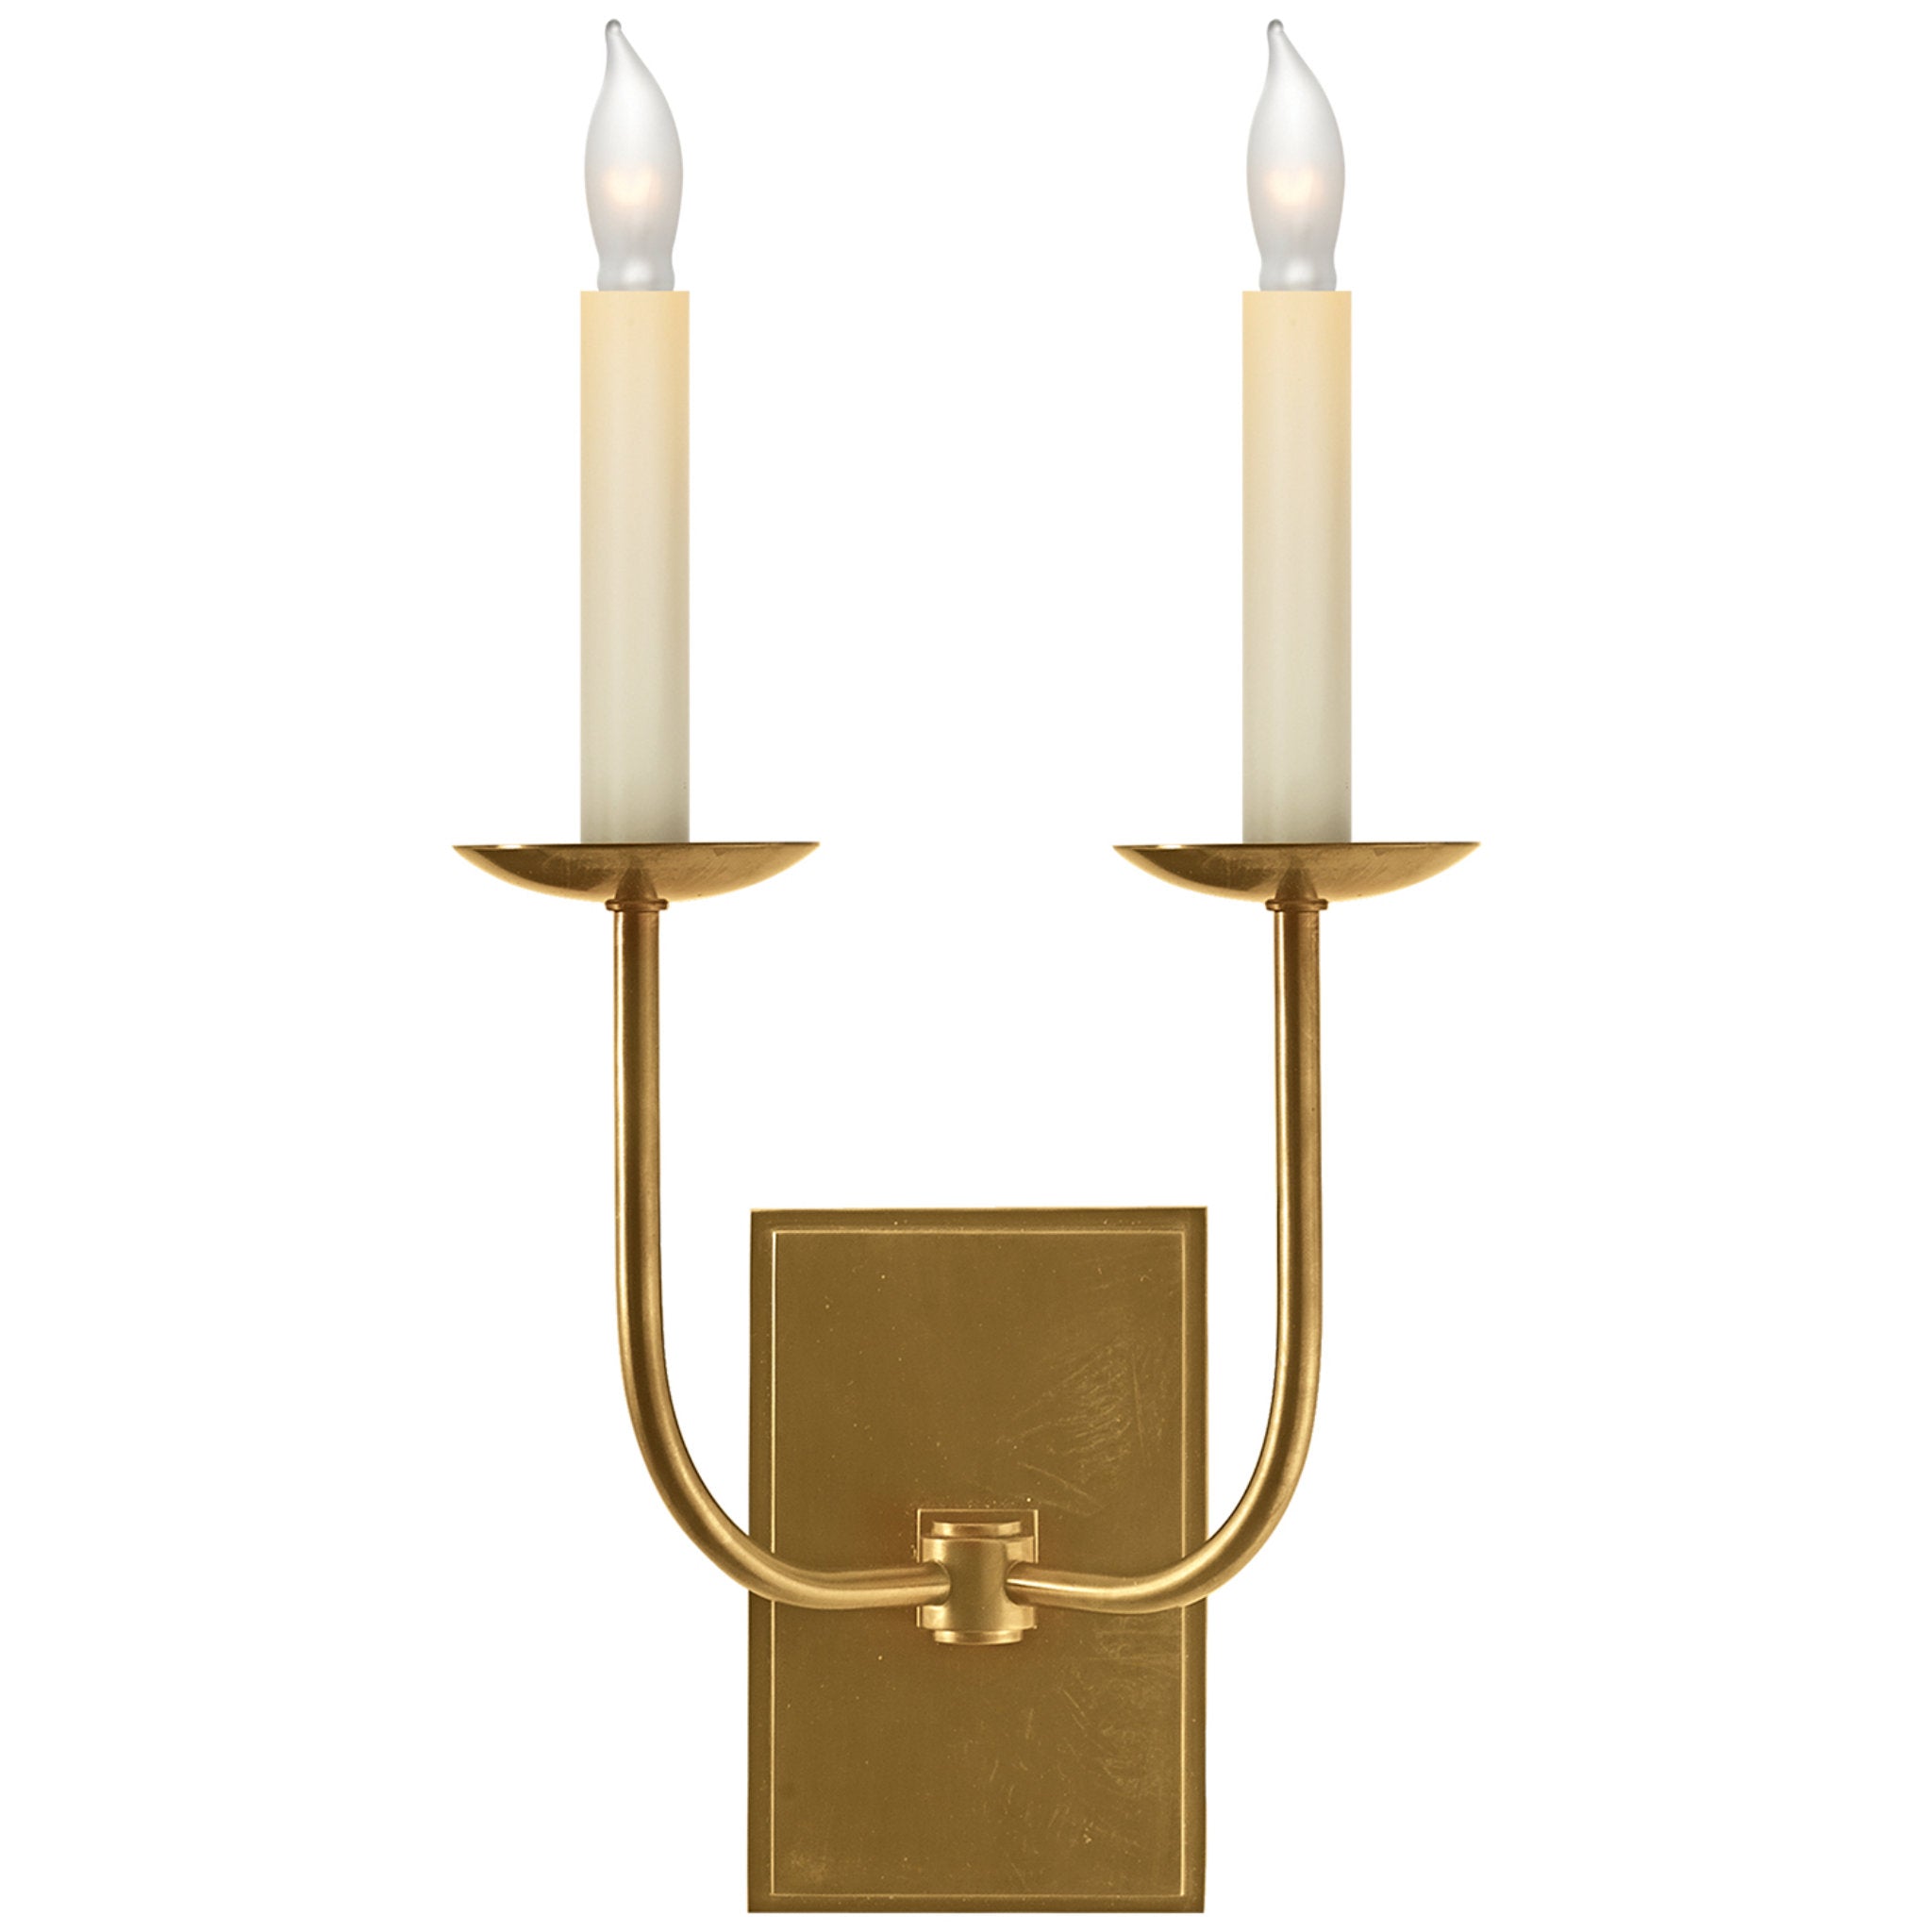 Chapman & Myers TT Double Sconce in Hand-Rubbed Antique Brass